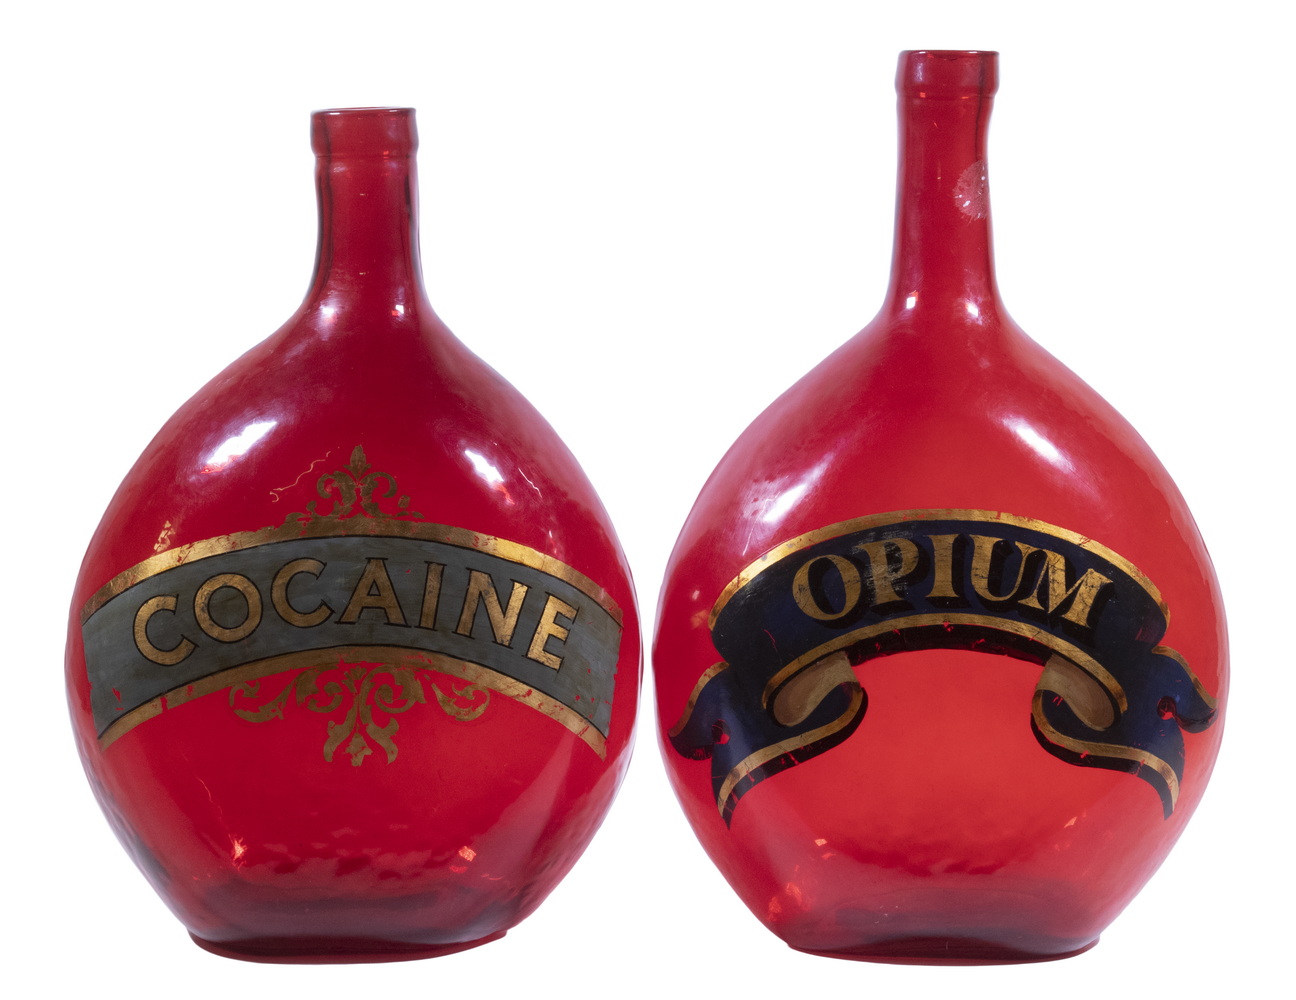 (2) RED APOTHECARY JARS - "COCAINE"